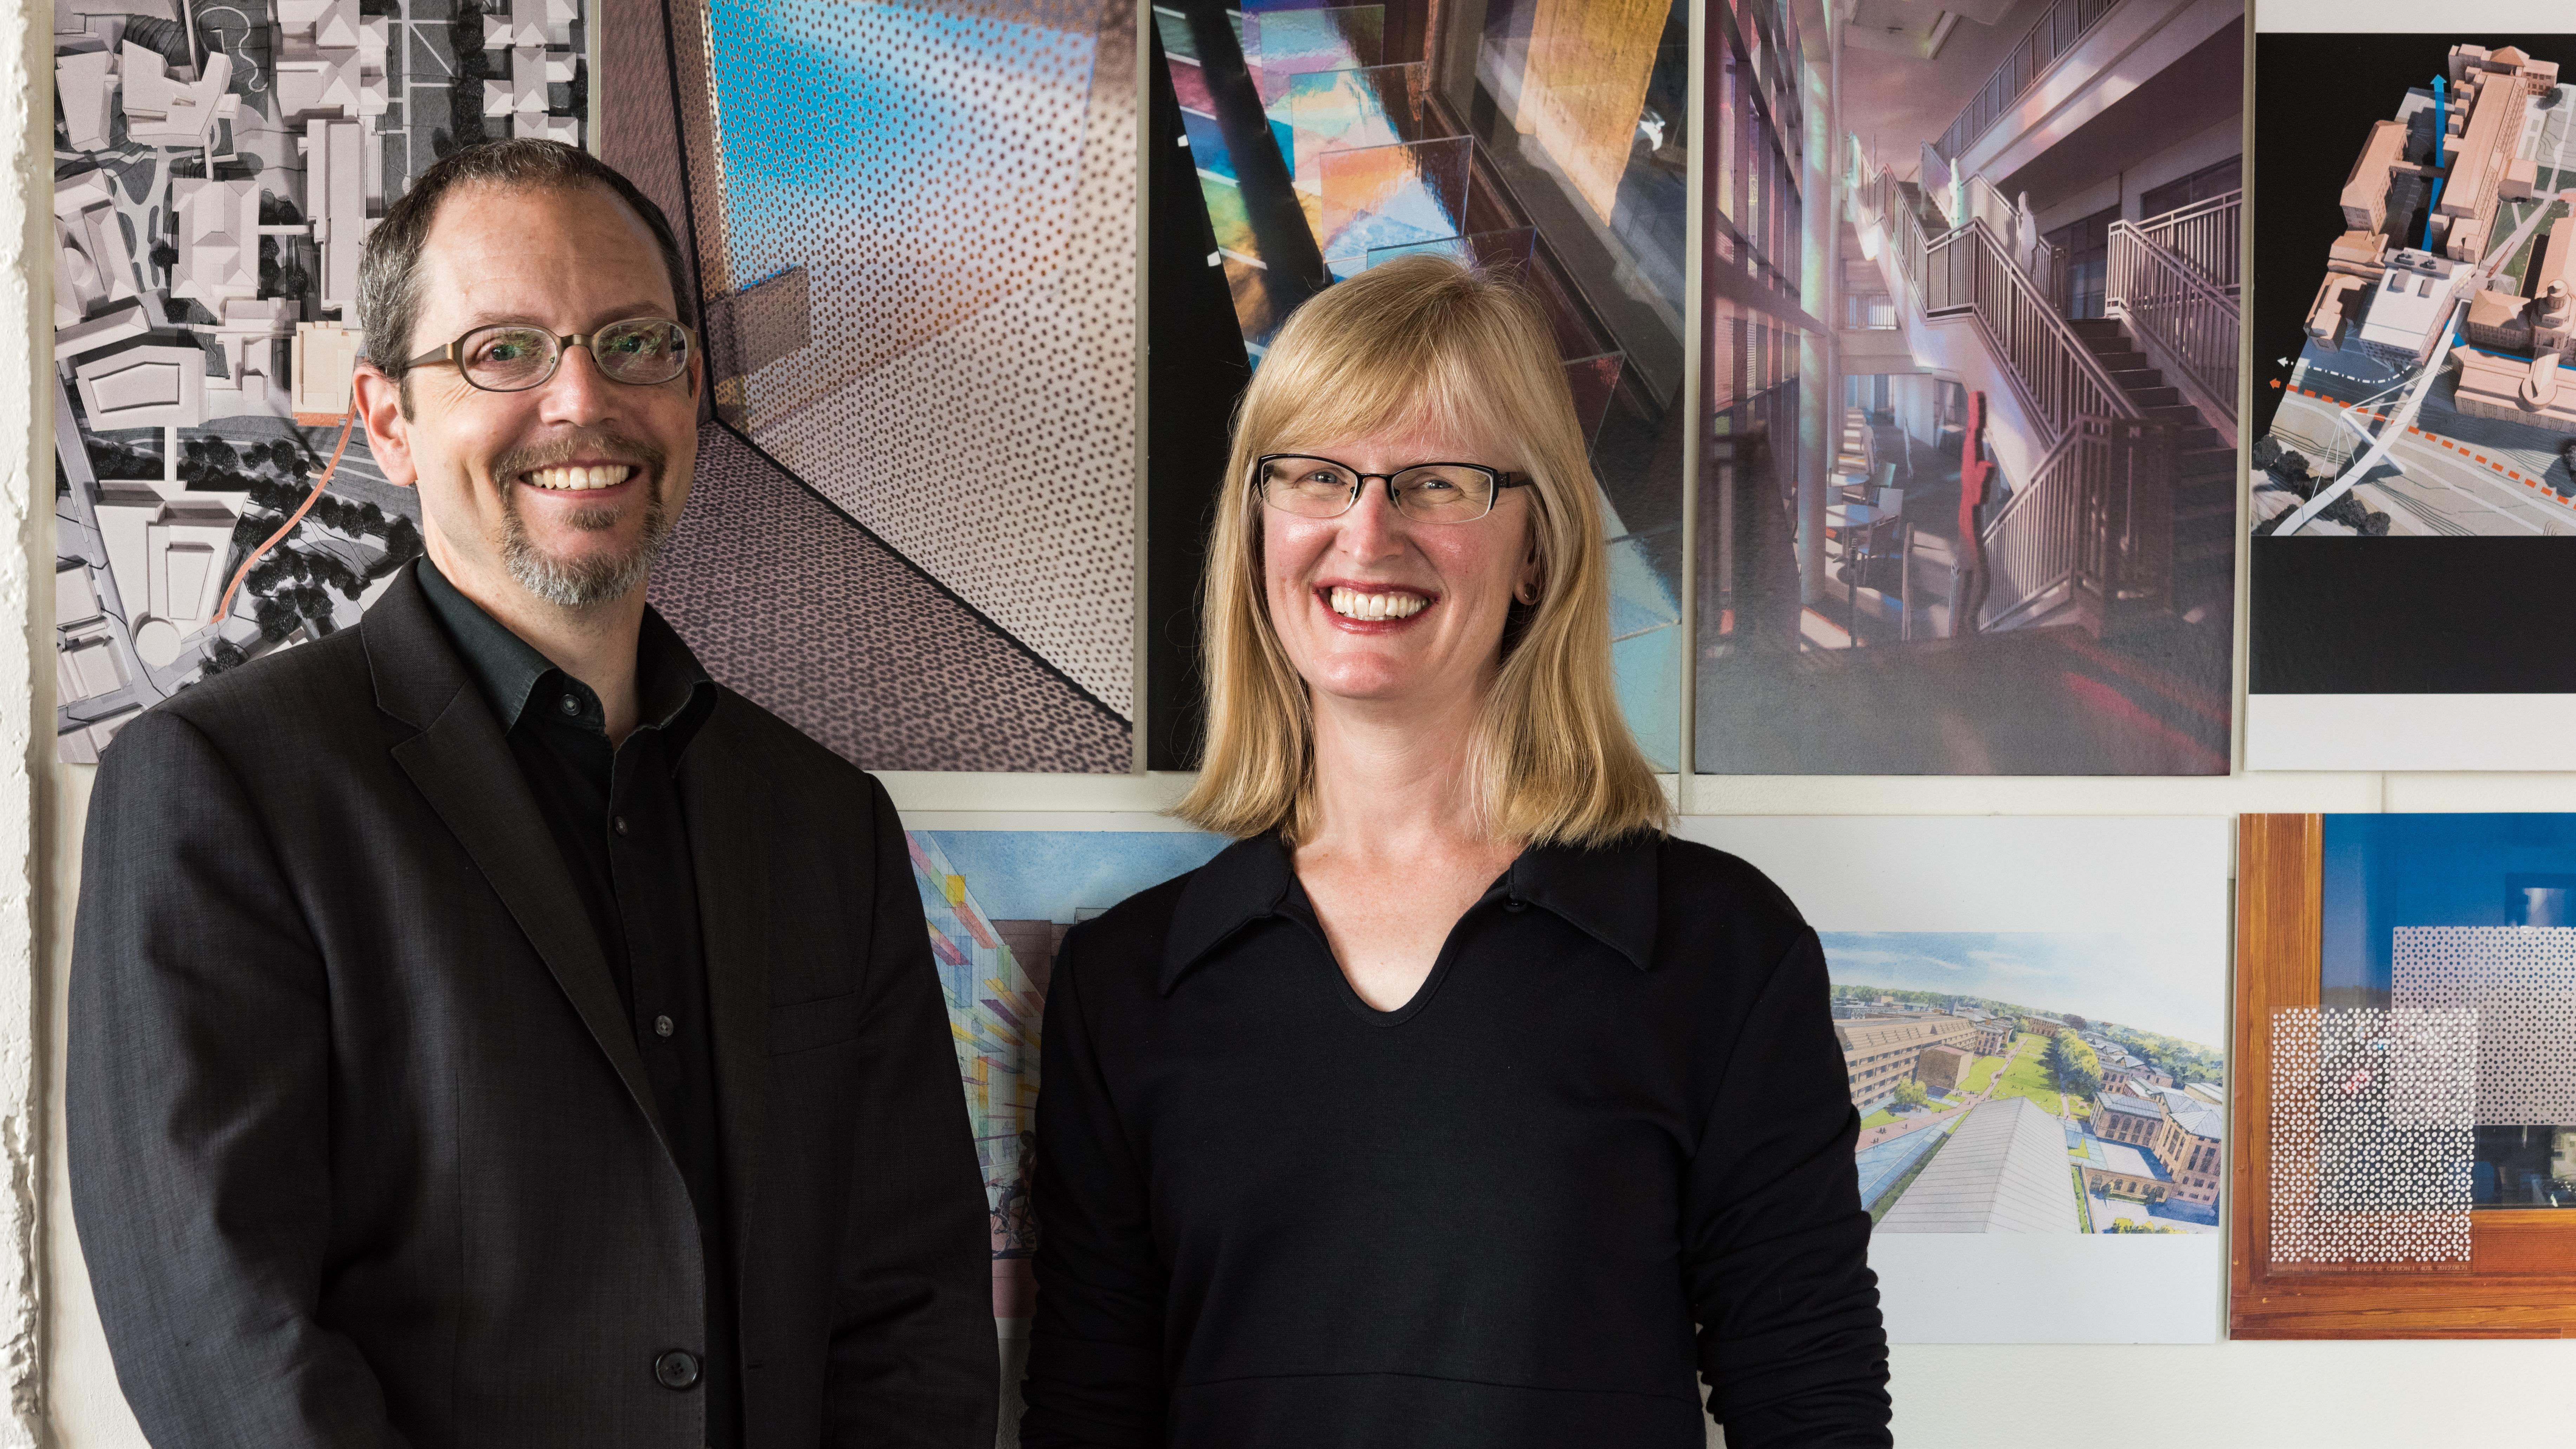 Michelle LaFoe and Isaac Campbell, OFFICE 52 Architecture